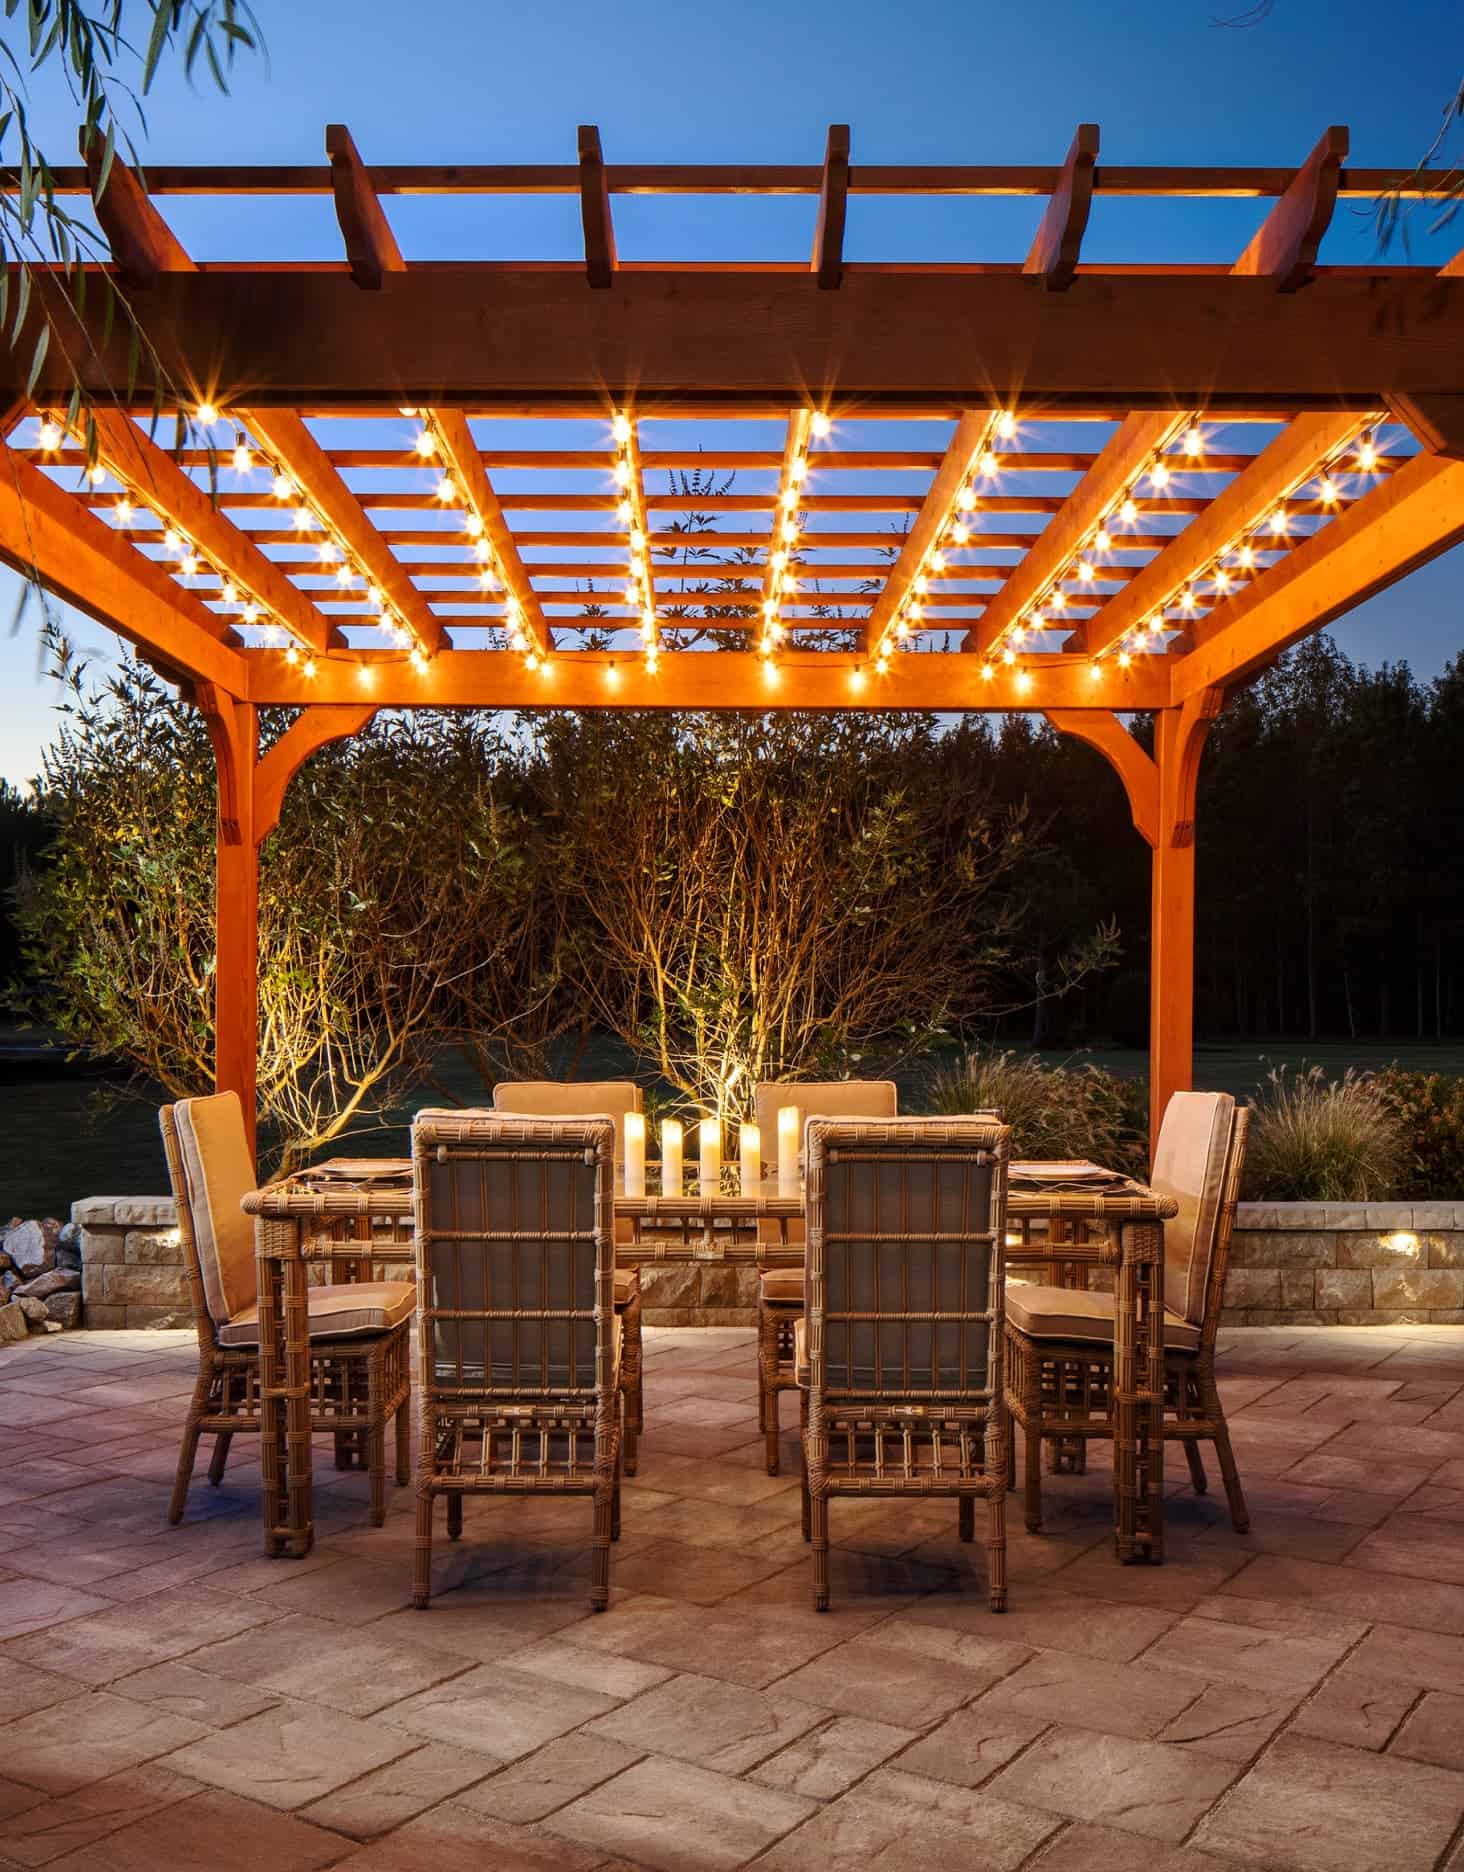 An outdoor dining space with a pergola and lights using Belgard products